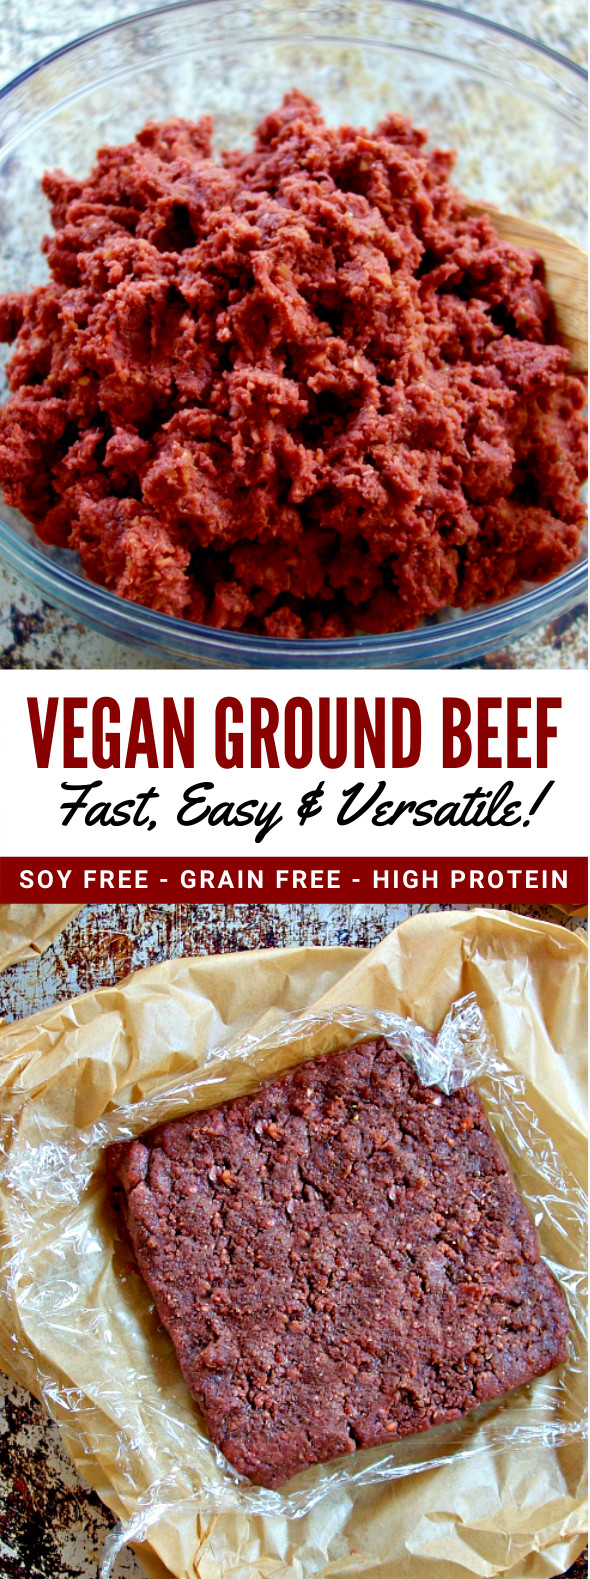 15 Of the Best Ideas for Ground Beef Protein